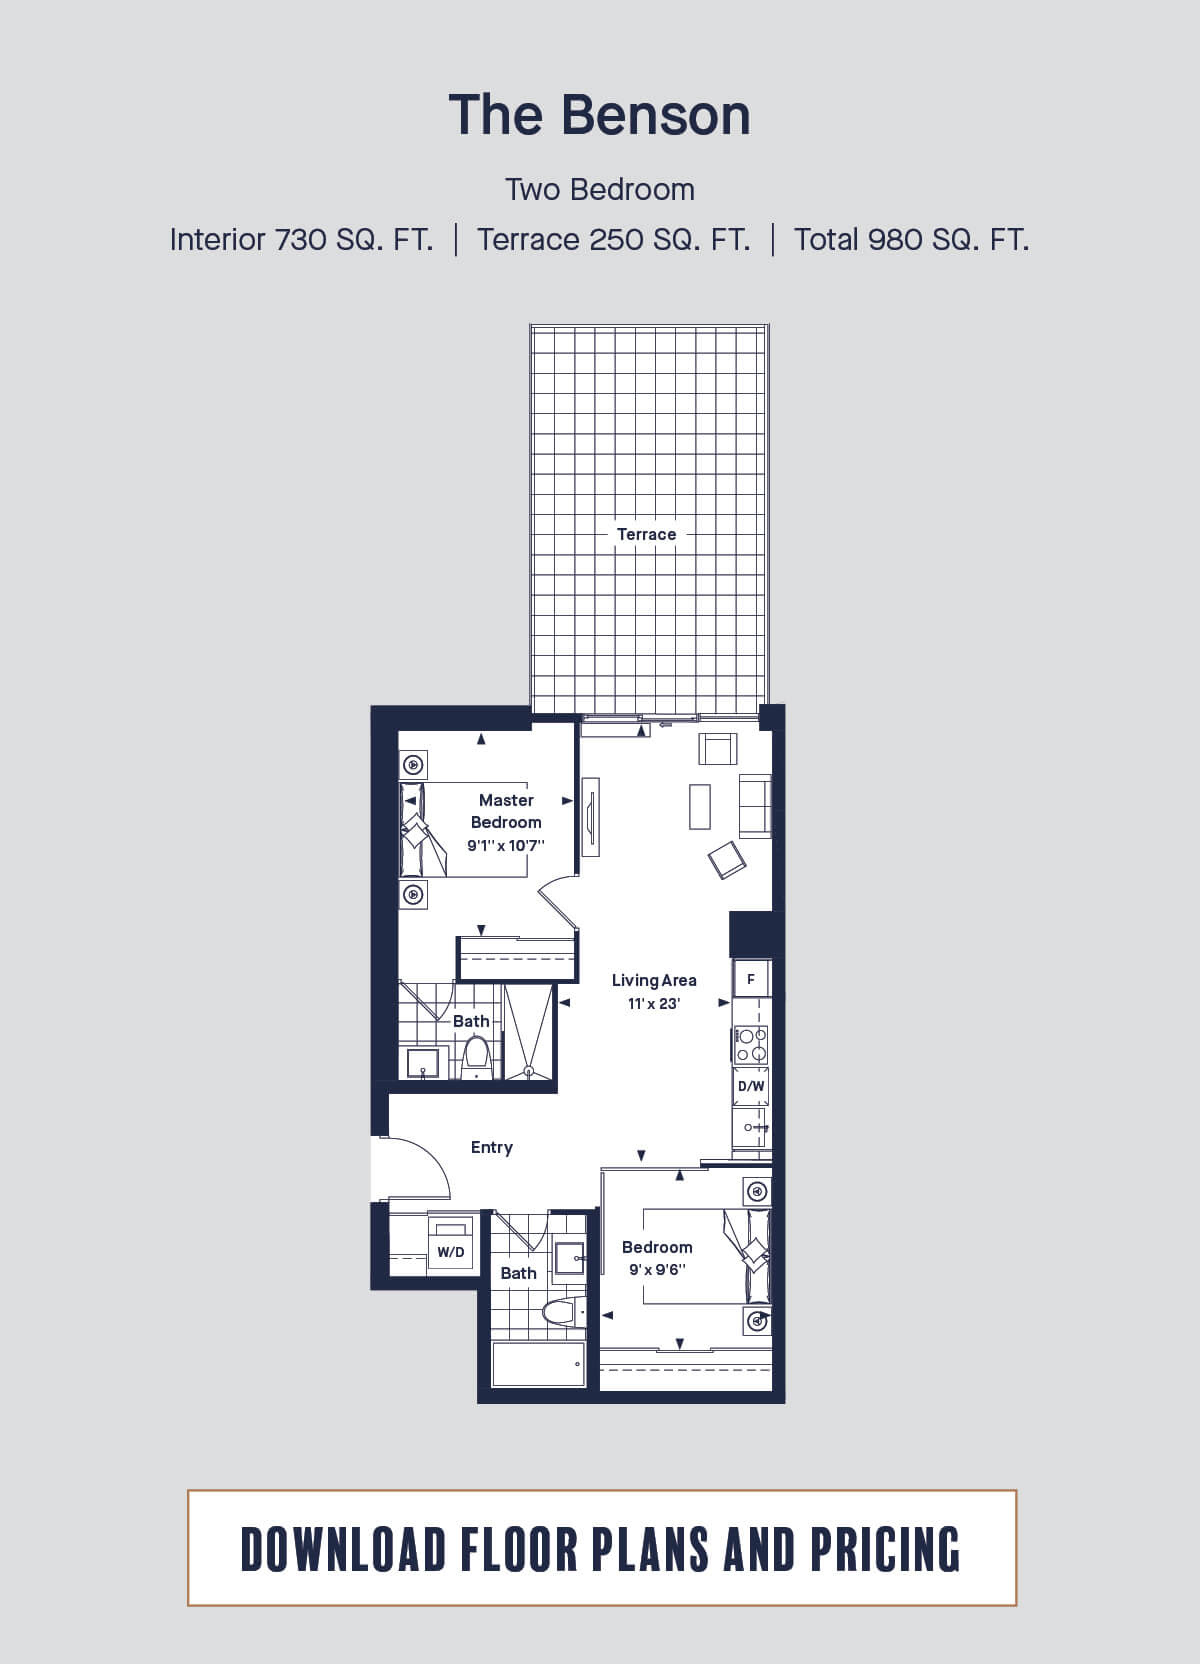 Download Floor Plans and Pricing